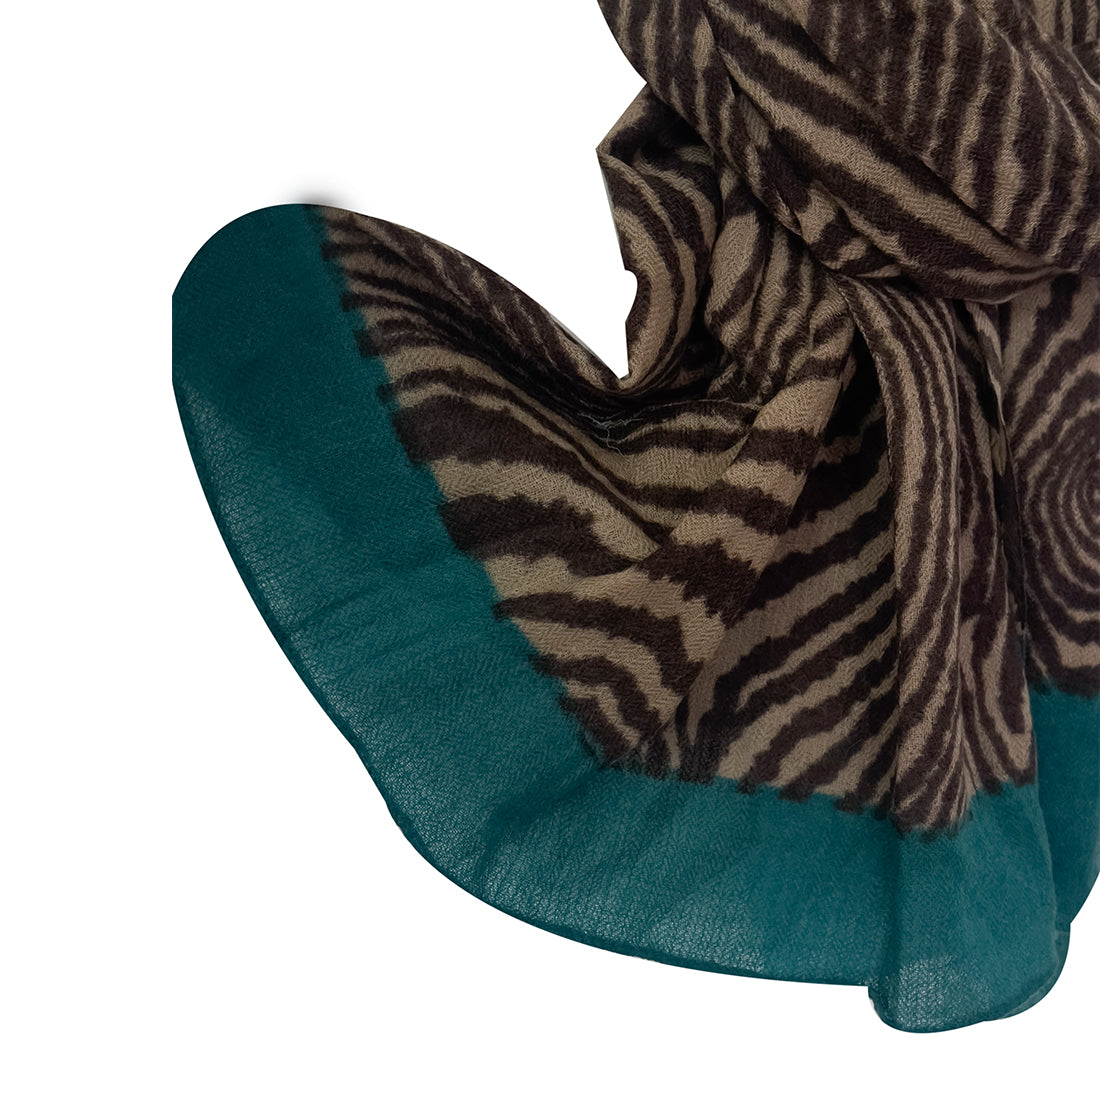 Contemporary Brown & Teal Abstract Printed Acrylic Winter Scarf